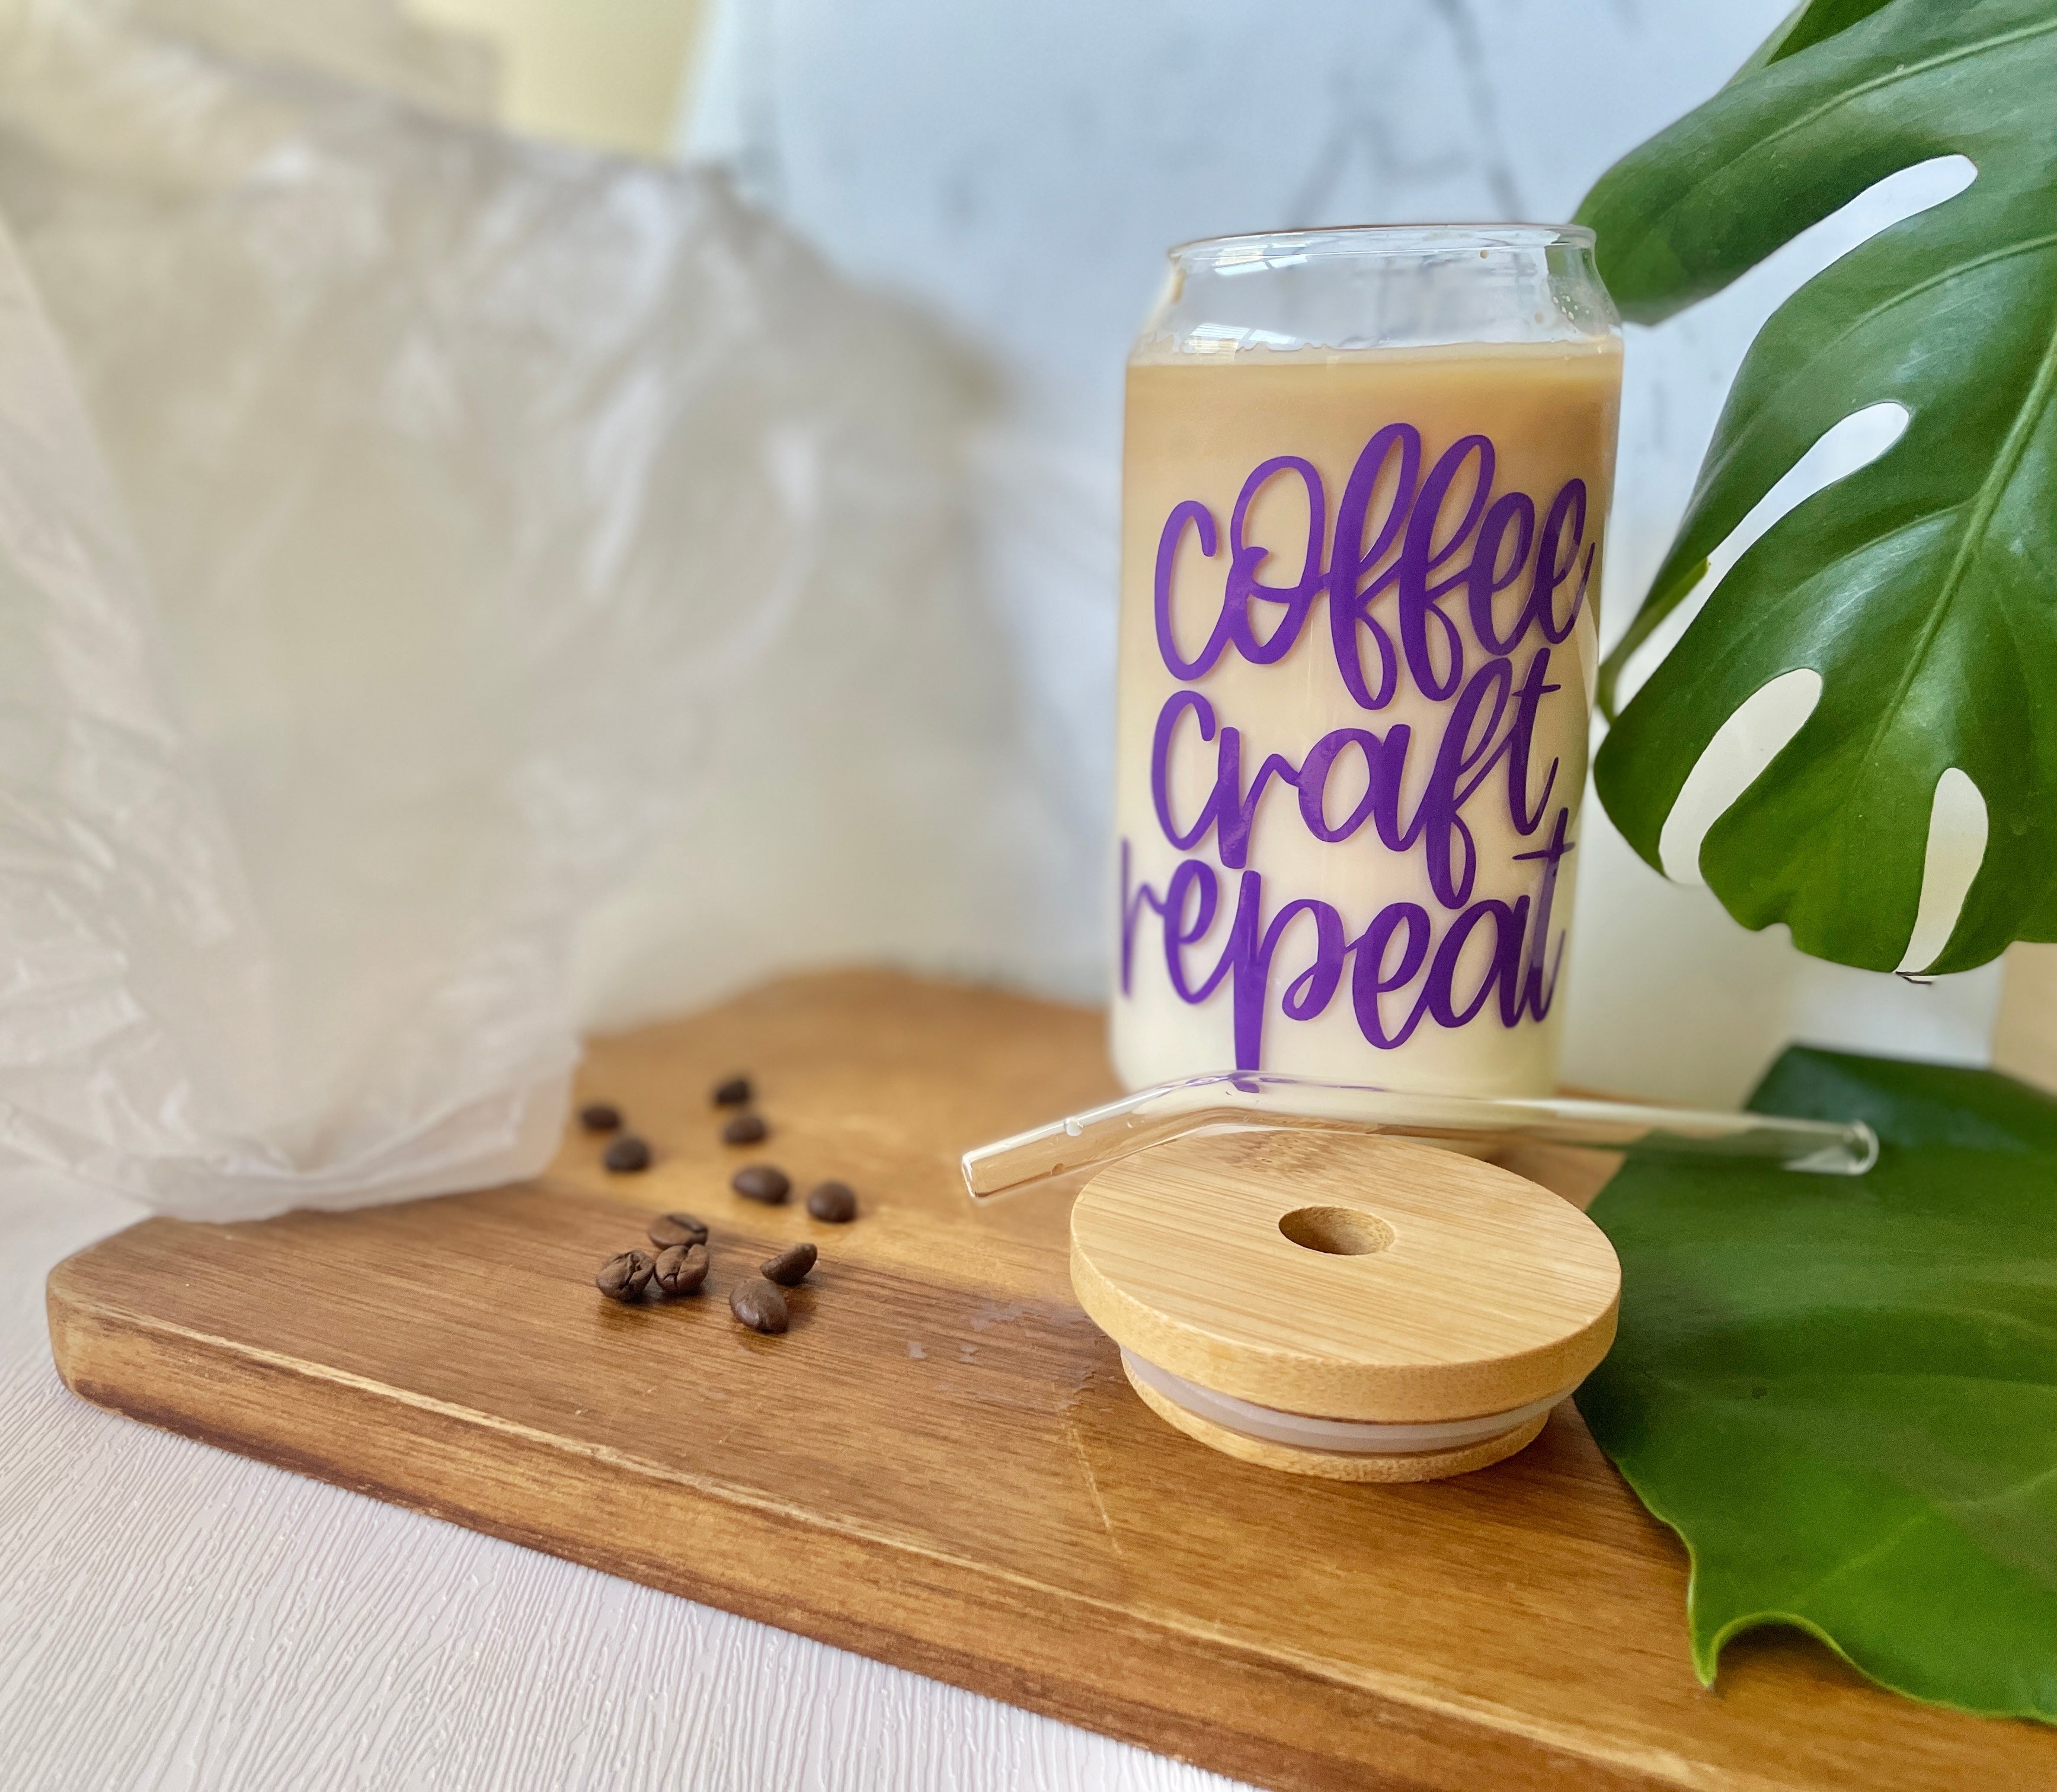 Featured Shops Daisy Glass Soda Can With Lid and Straw 16 oz Smiley Face Libbey  Glass Iced Coffee Cup Bamboo Lid glass tumbler with straw